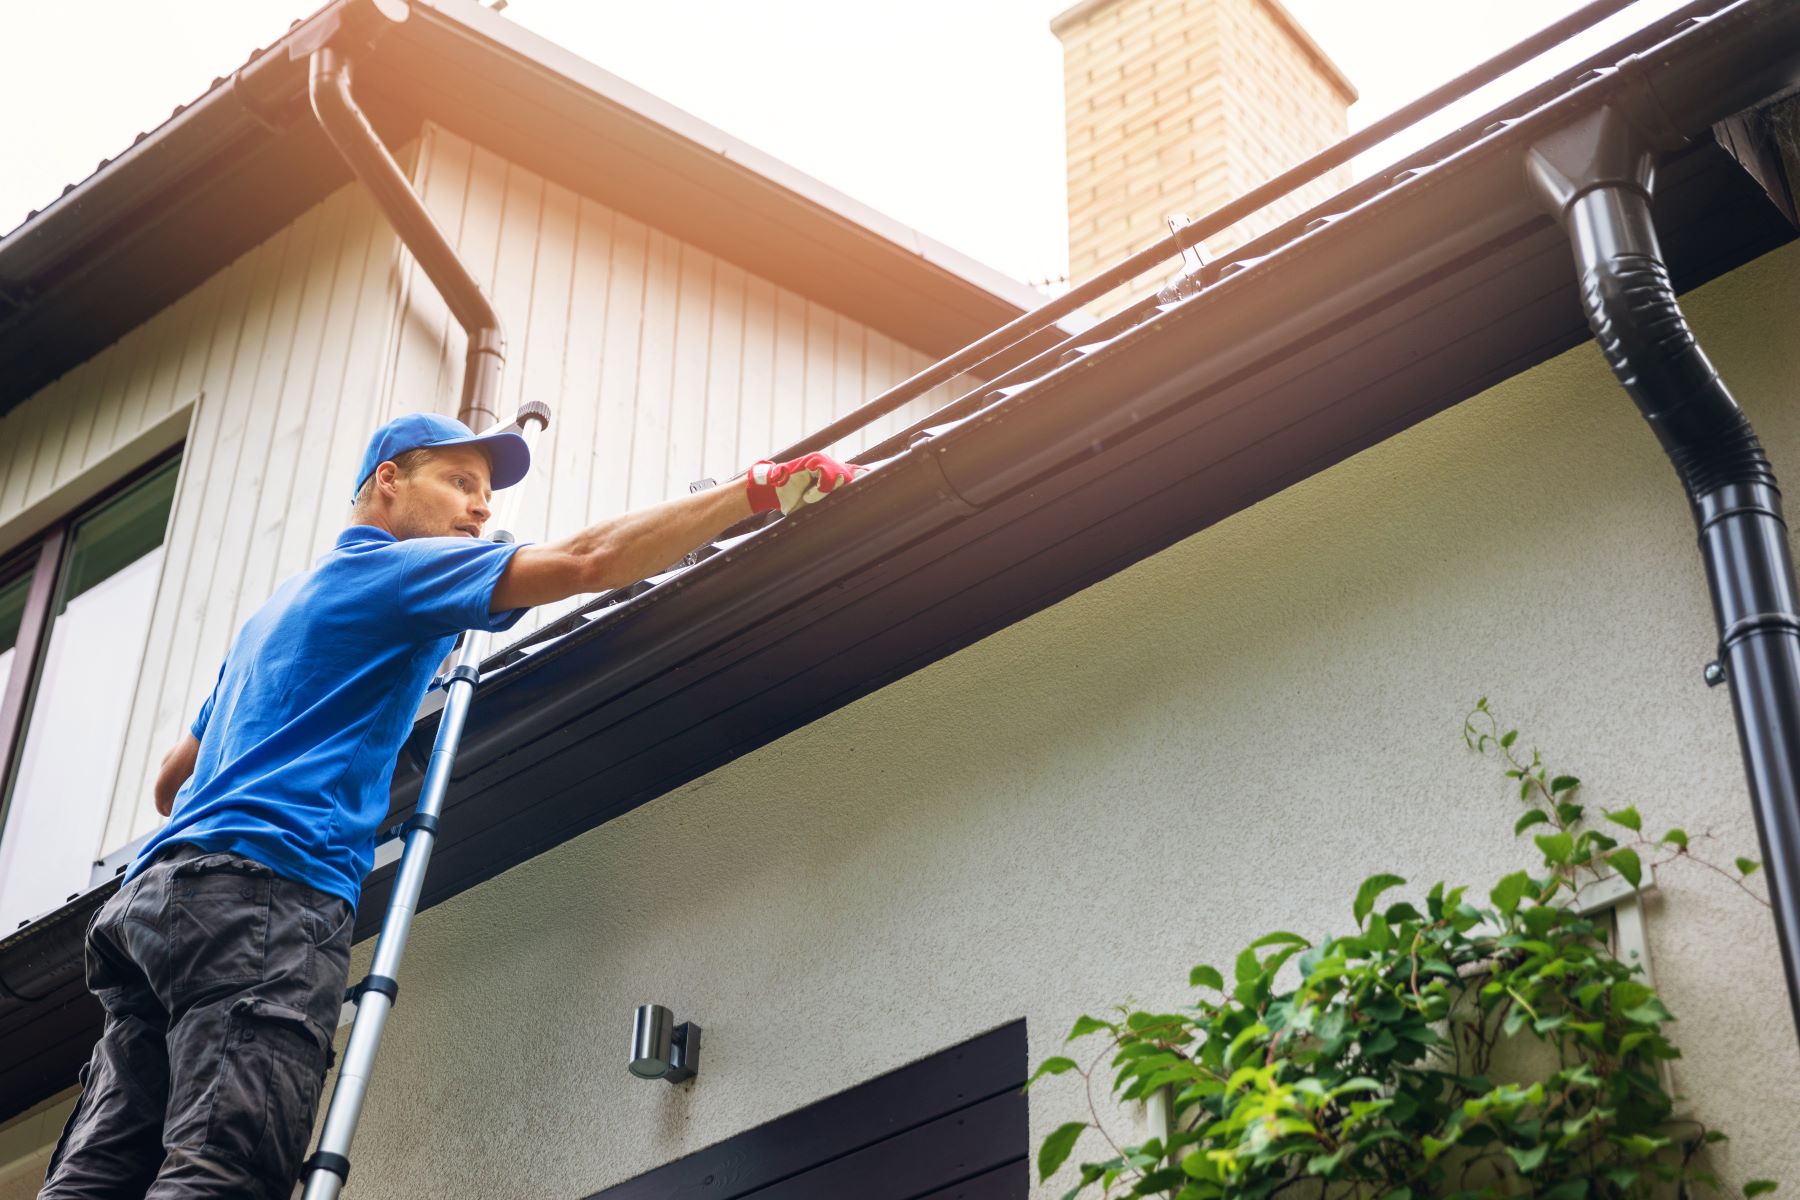 Gutter Cleaning Service: How it Works, Importance, and Benefits